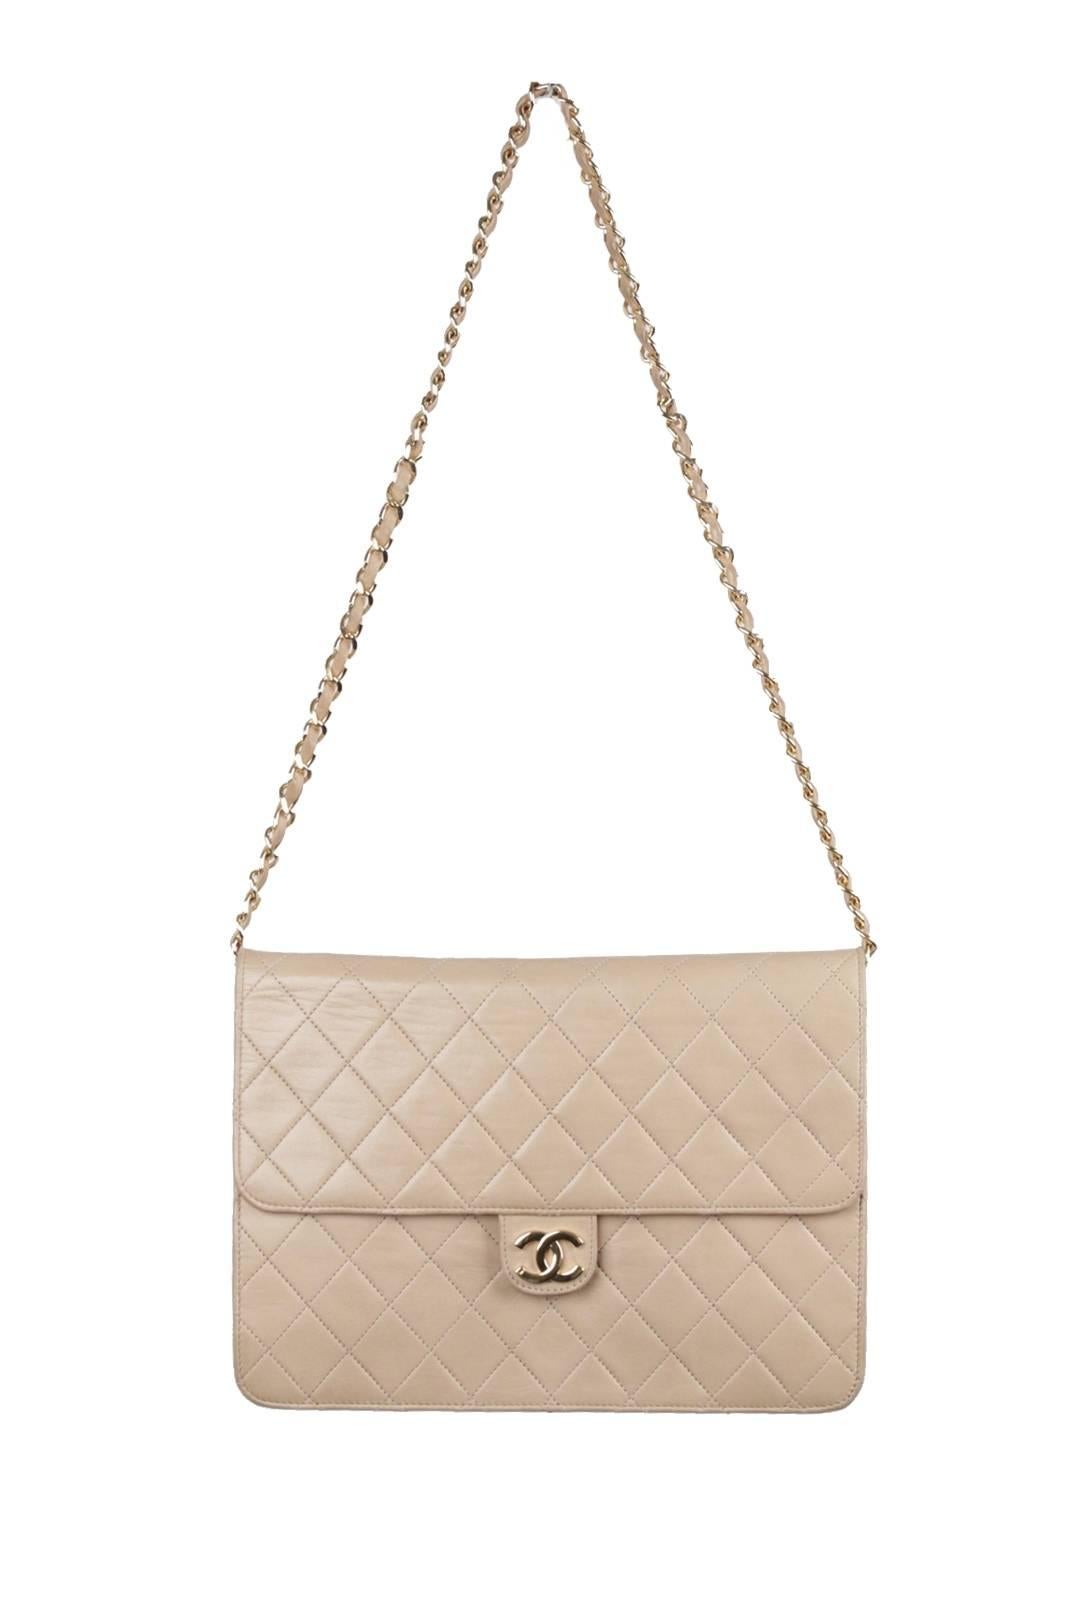 - Period/Era: 1980s
- Quilted lamb skin is in beige color
- Chanel CC gold logo on the front 
- Flap with snap button closure on the front
- Chanel CC stitched behind the flap
- White leather lining
- 1 zippered pocket inside.
- Removable chain